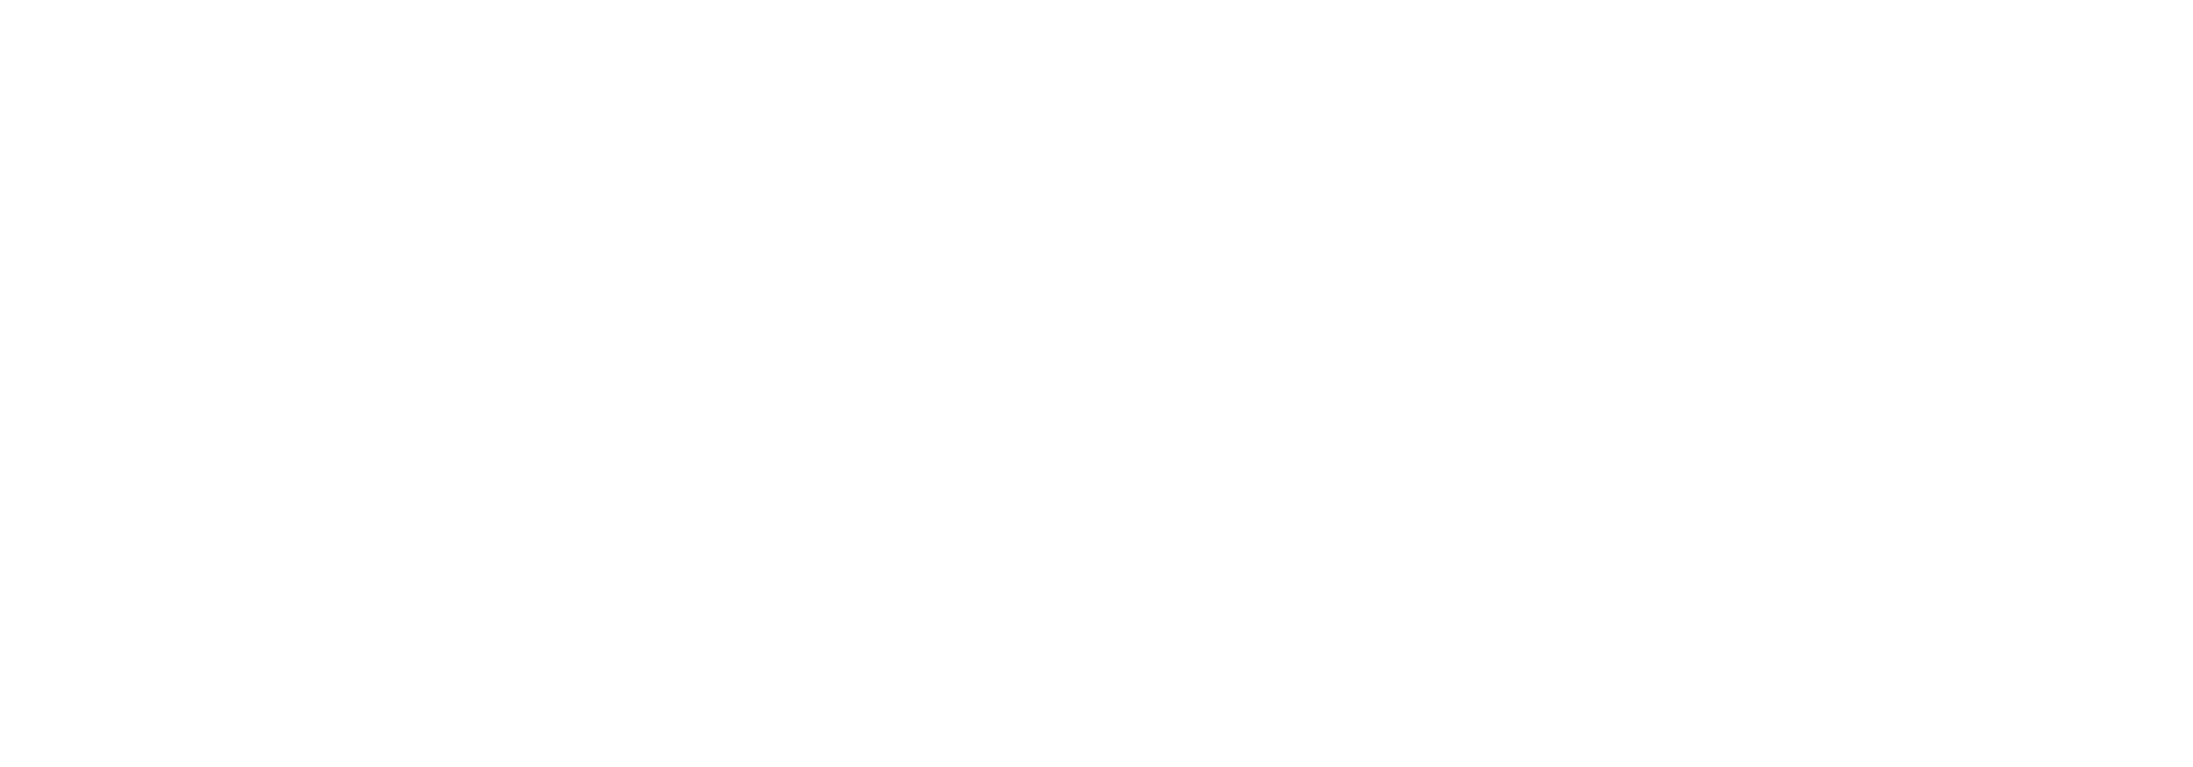 geography essay competition 2022